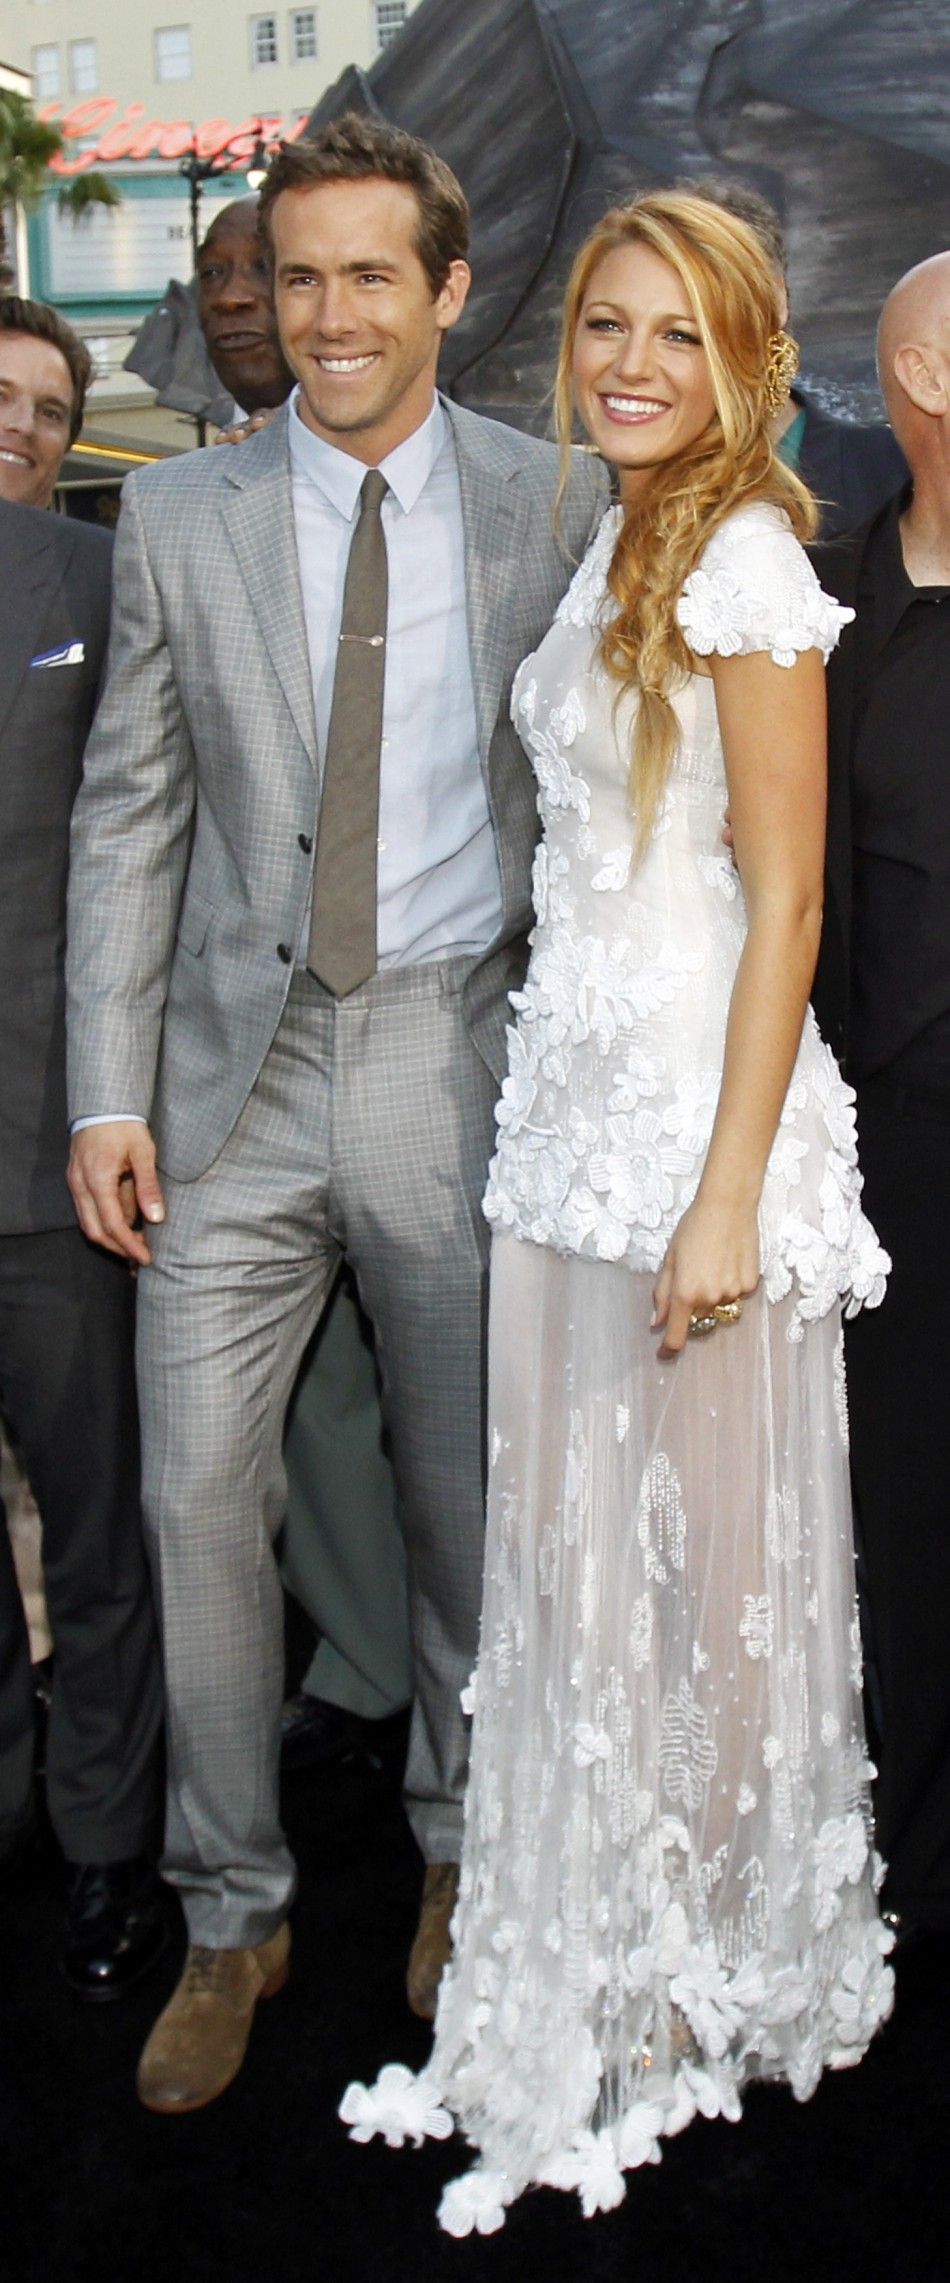 Cast members Ryan Reynolds and Blake Lively pose at the premiere of quotGreen Lanternquot at the Graumans Chinese theatre in Hollywood, California June 15, 2011. The movie opens in the U.S. on June 17. 